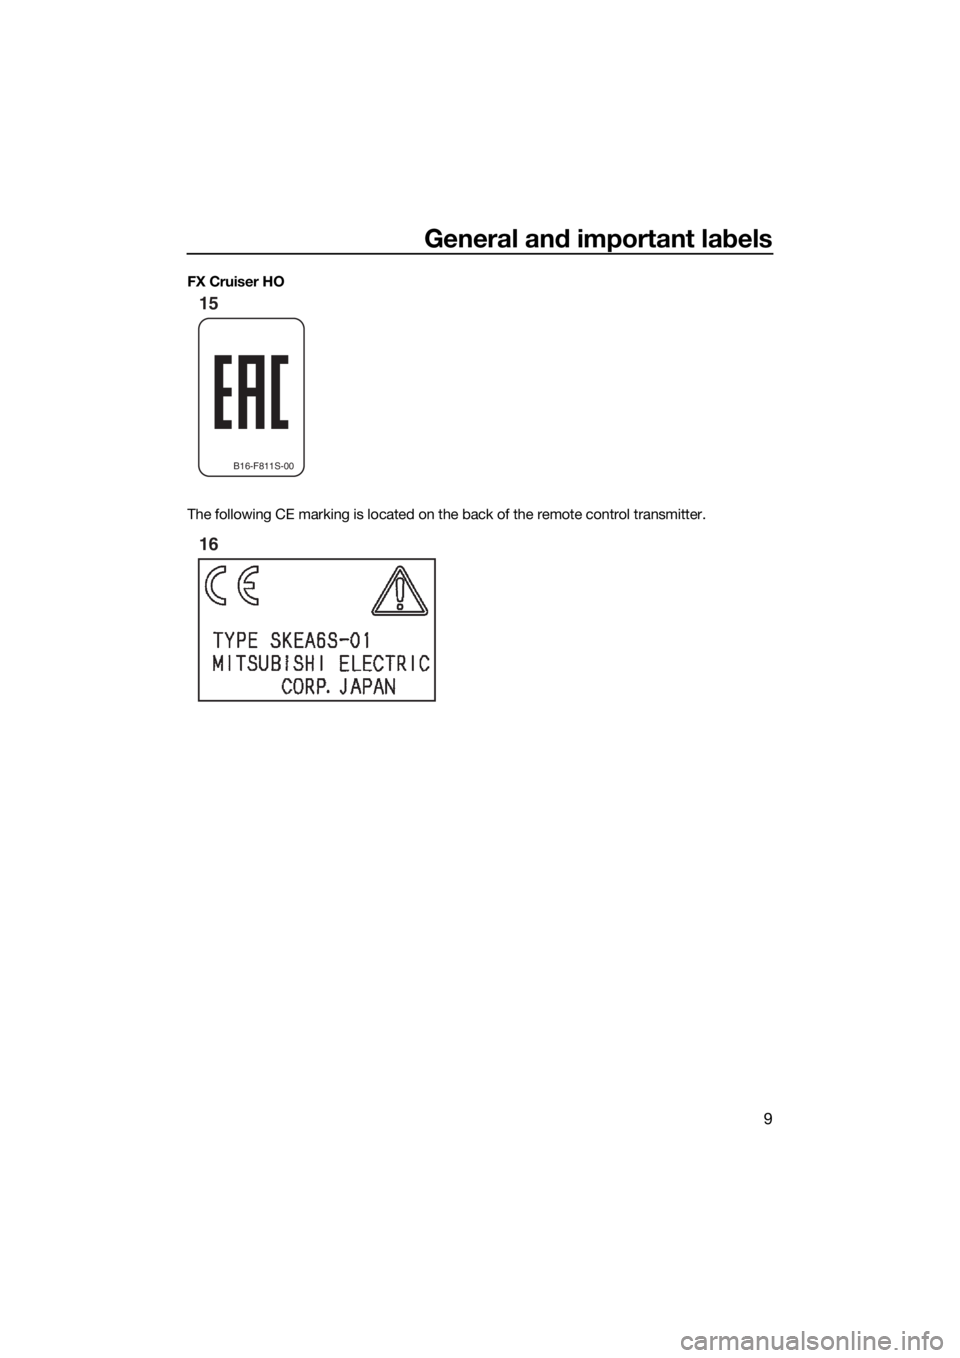 YAMAHA FX HO CRUISER 2018 User Guide General and important labels
9
FX Cruiser HO
The following CE marking is located on the back of the remote control transmitter.
B16-F811S-00
15
16
UF2T78E0.book  Page 9  Wednesday, July 12, 2017  9:40